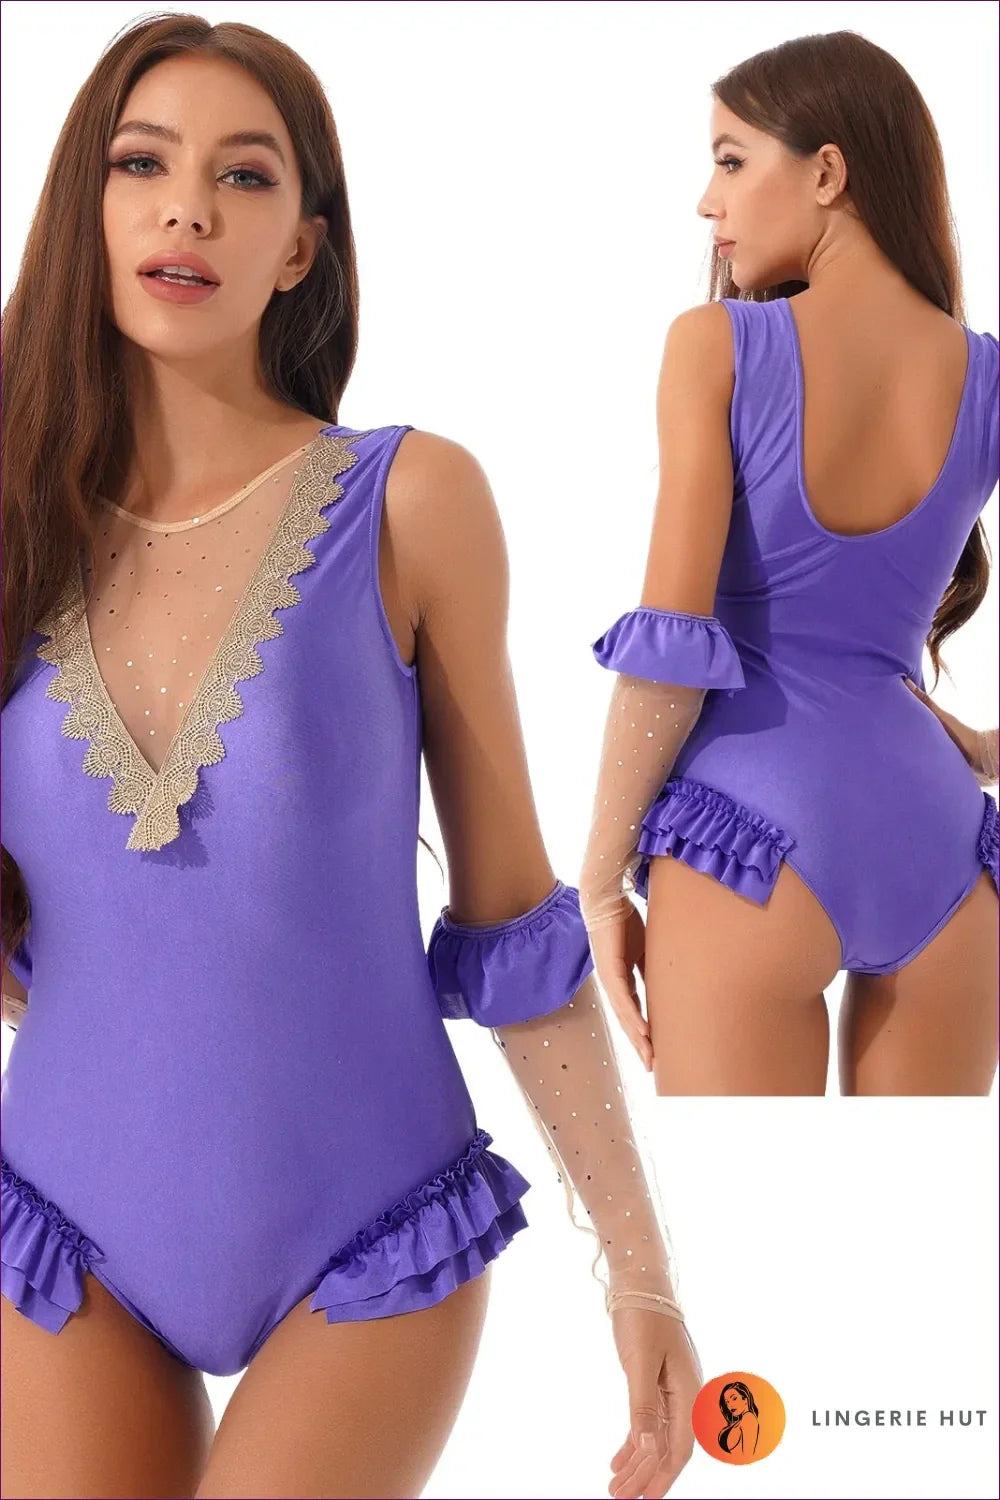 Eyes Will Turn Your Way With Our Backless Ruffle Leotard Circus Costume. Bright Yellow Leotard, Multicolored